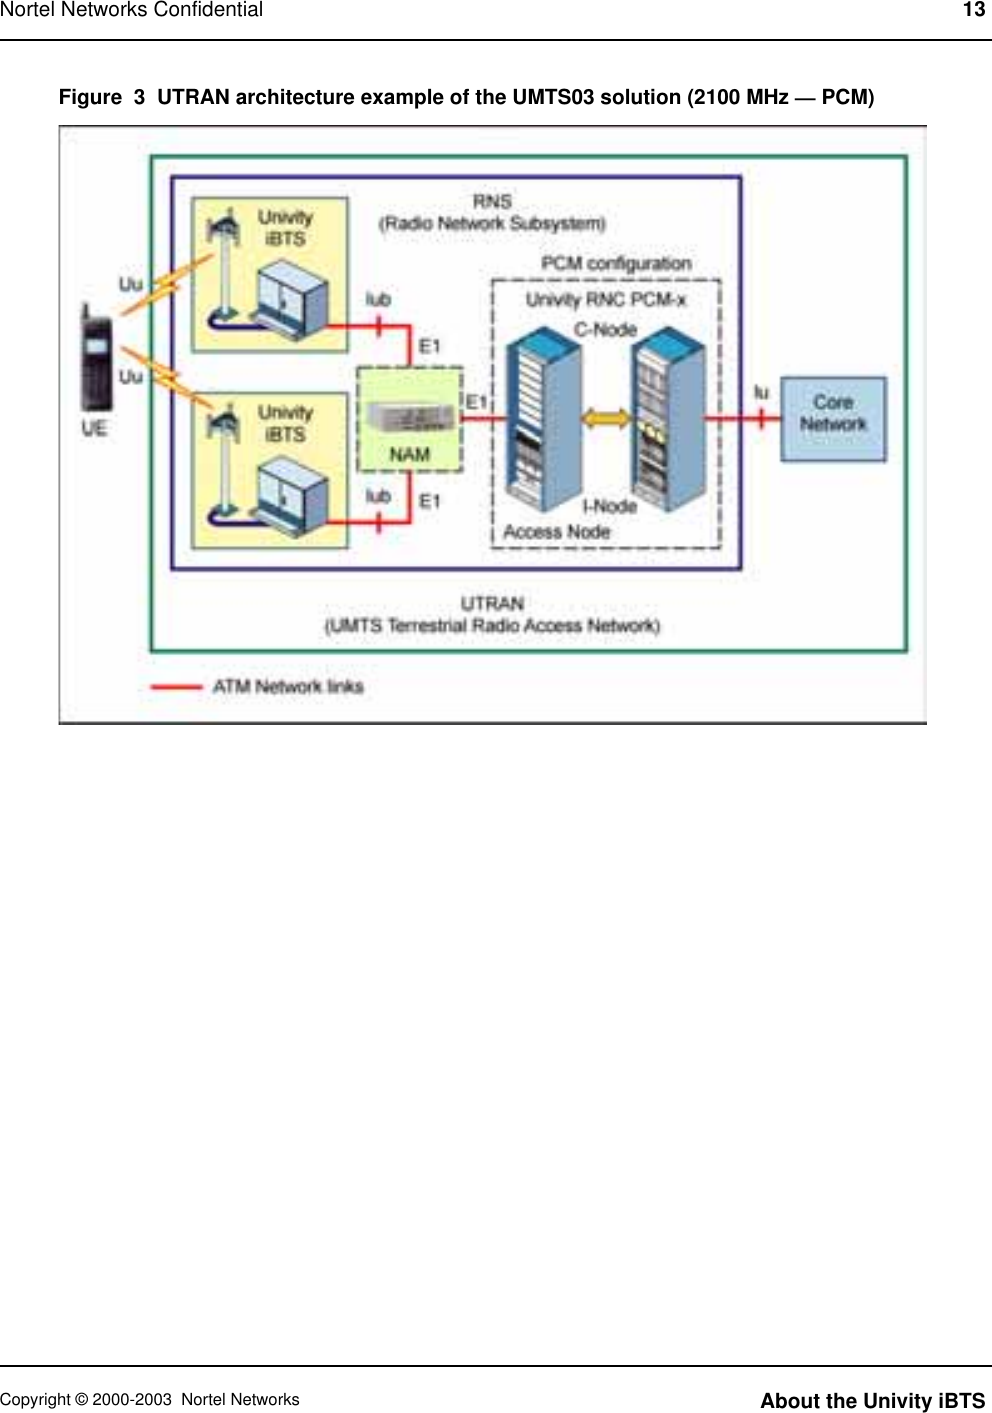 Figure 3 UTRAN architecture example of the UMTS03 solution (2100 MHz —PCM)Nortel Networks Confidential 13Copyright © 2000-2003 Nortel Networks About the Univity iBTS